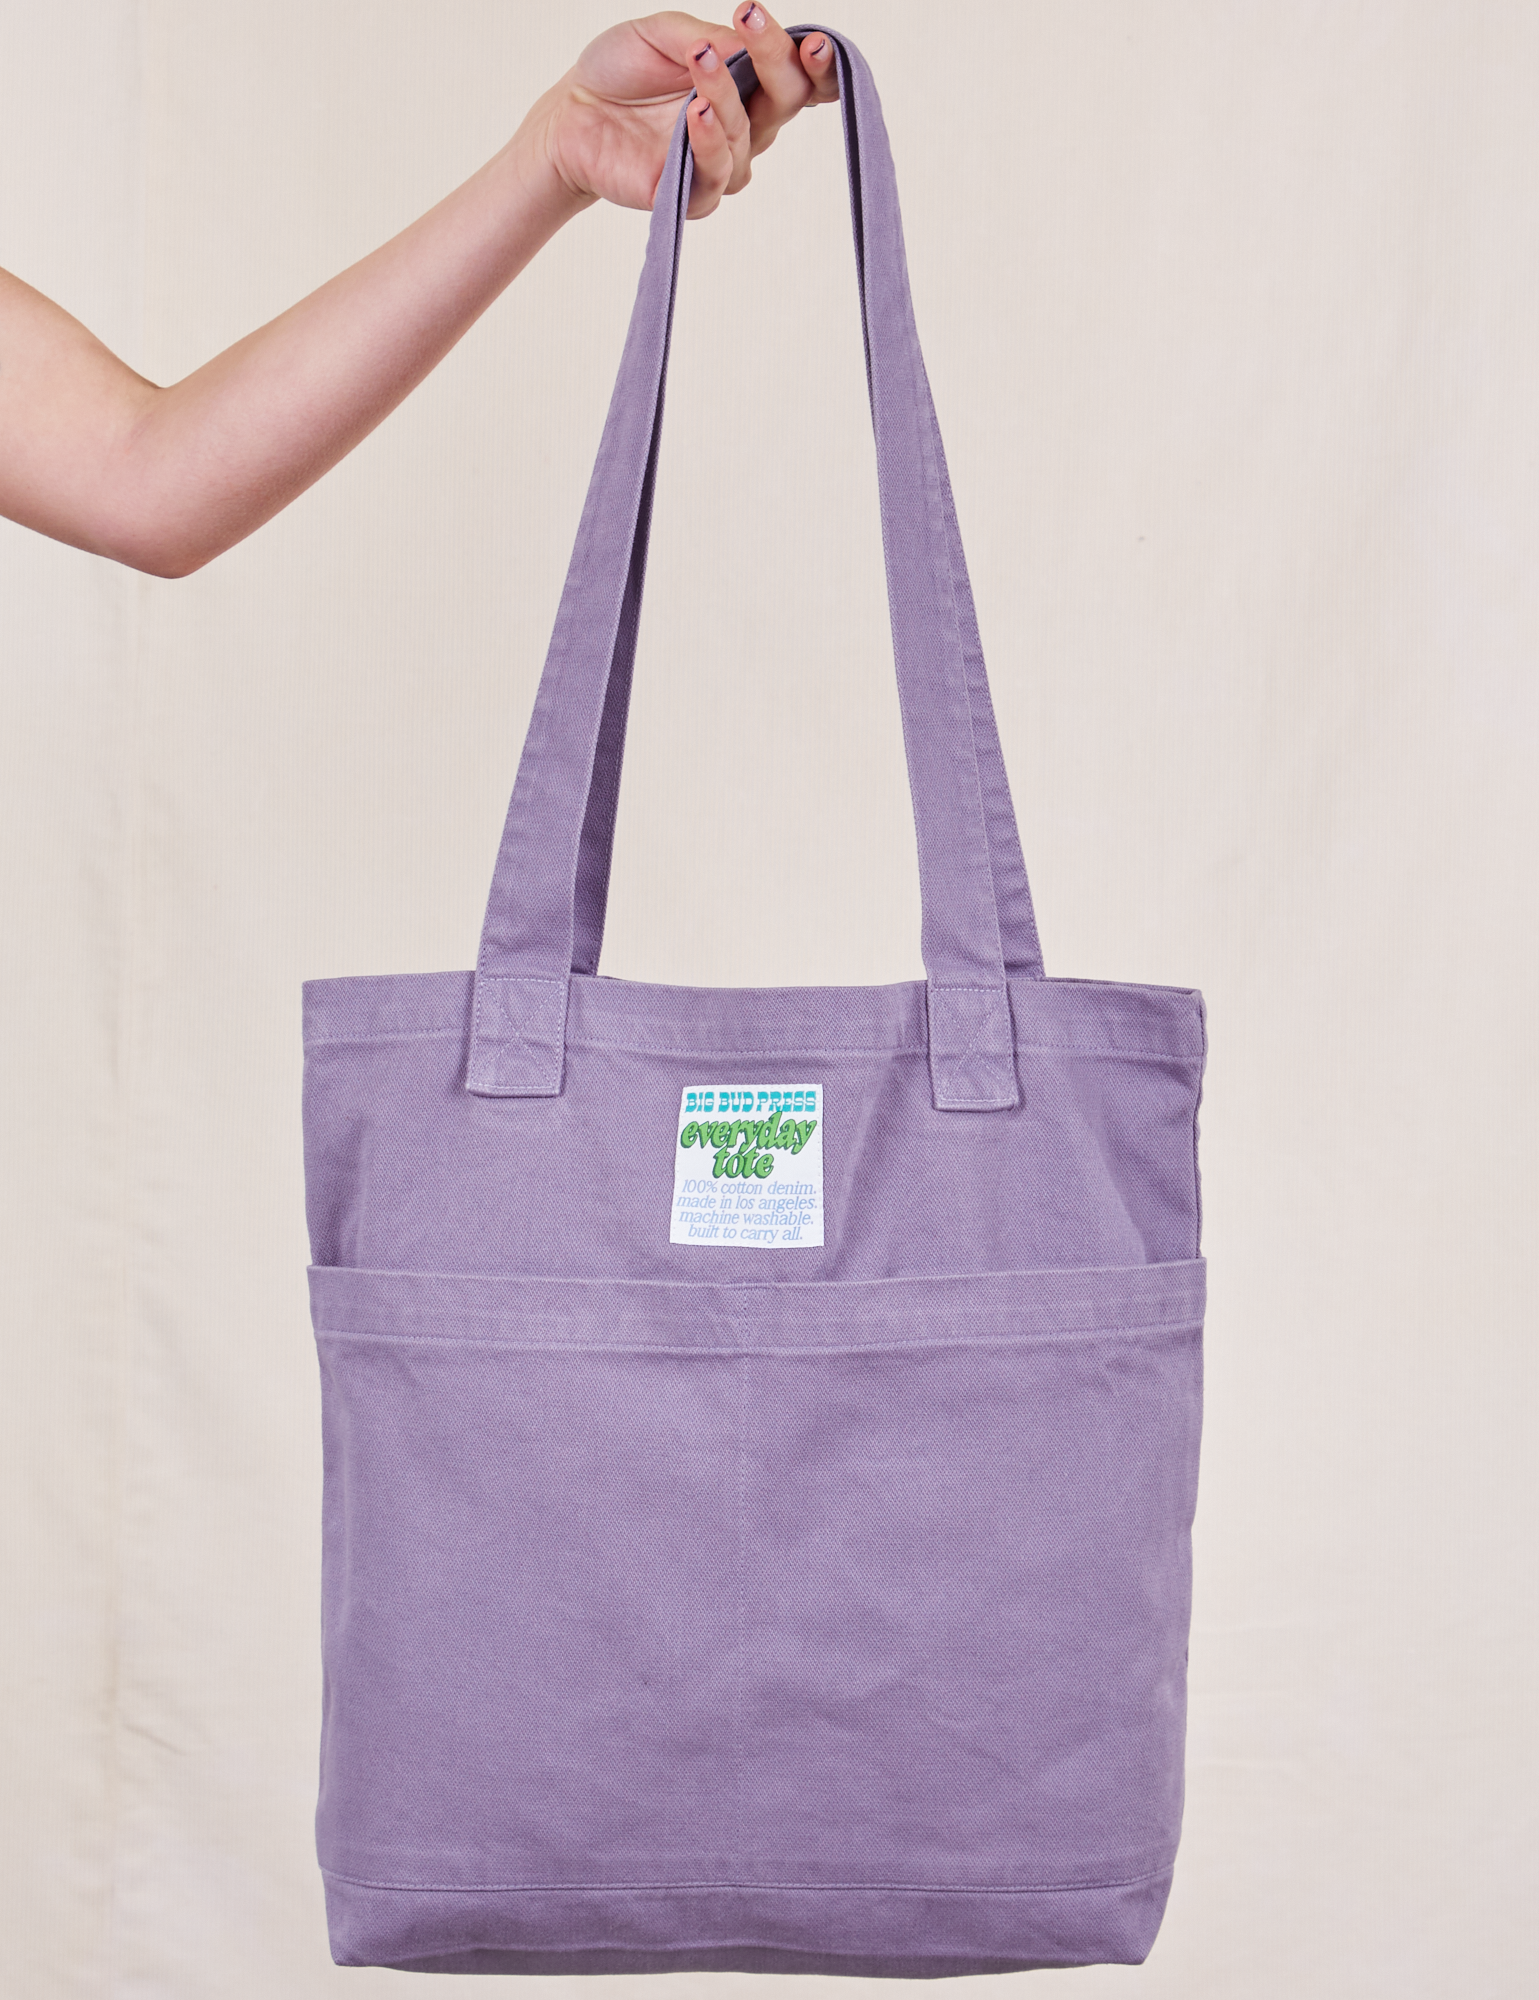 Everyday Tote Bag in Faded Grape